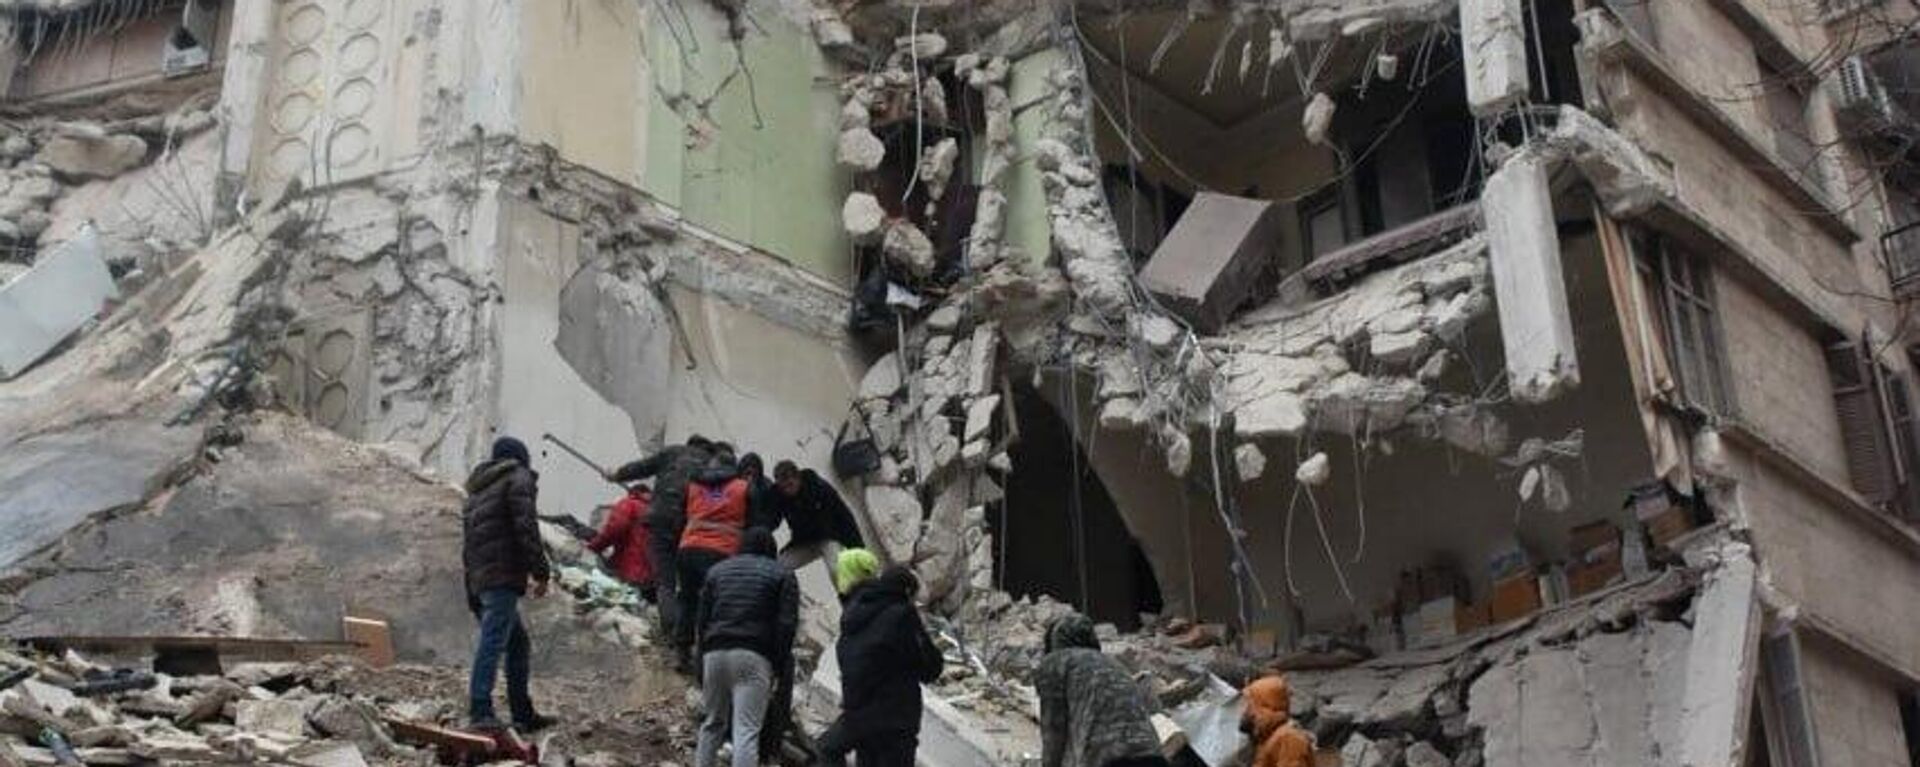 Rescue efforts are underway in Aleppo, Syria, after a devastating earthquake toppled buildings, leaving people trapped under the rubble. - Sputnik International, 1920, 02.08.2023